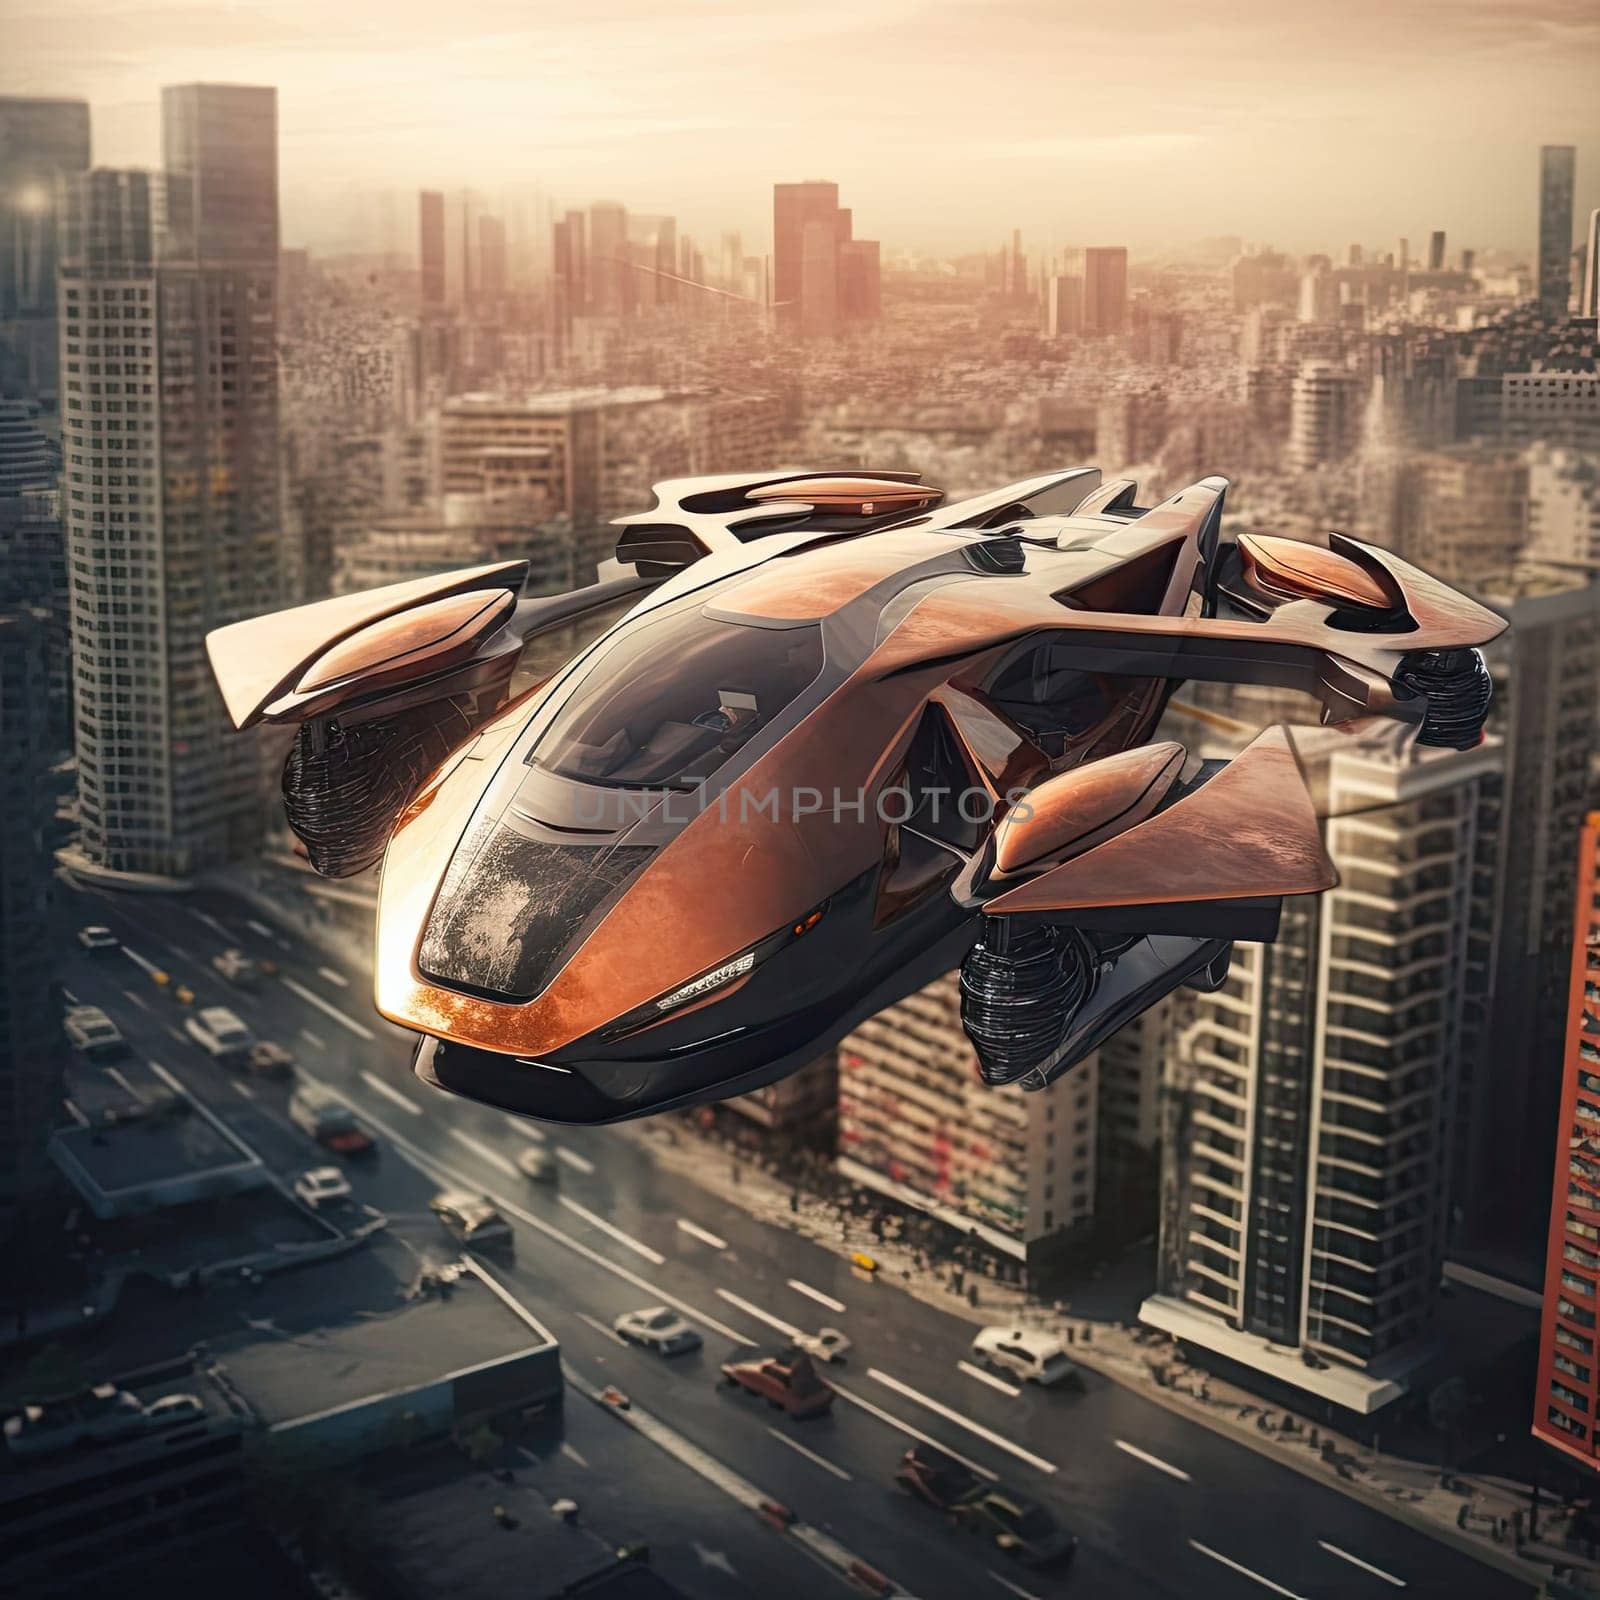 The flying car of the future flies in the city by cherezoff